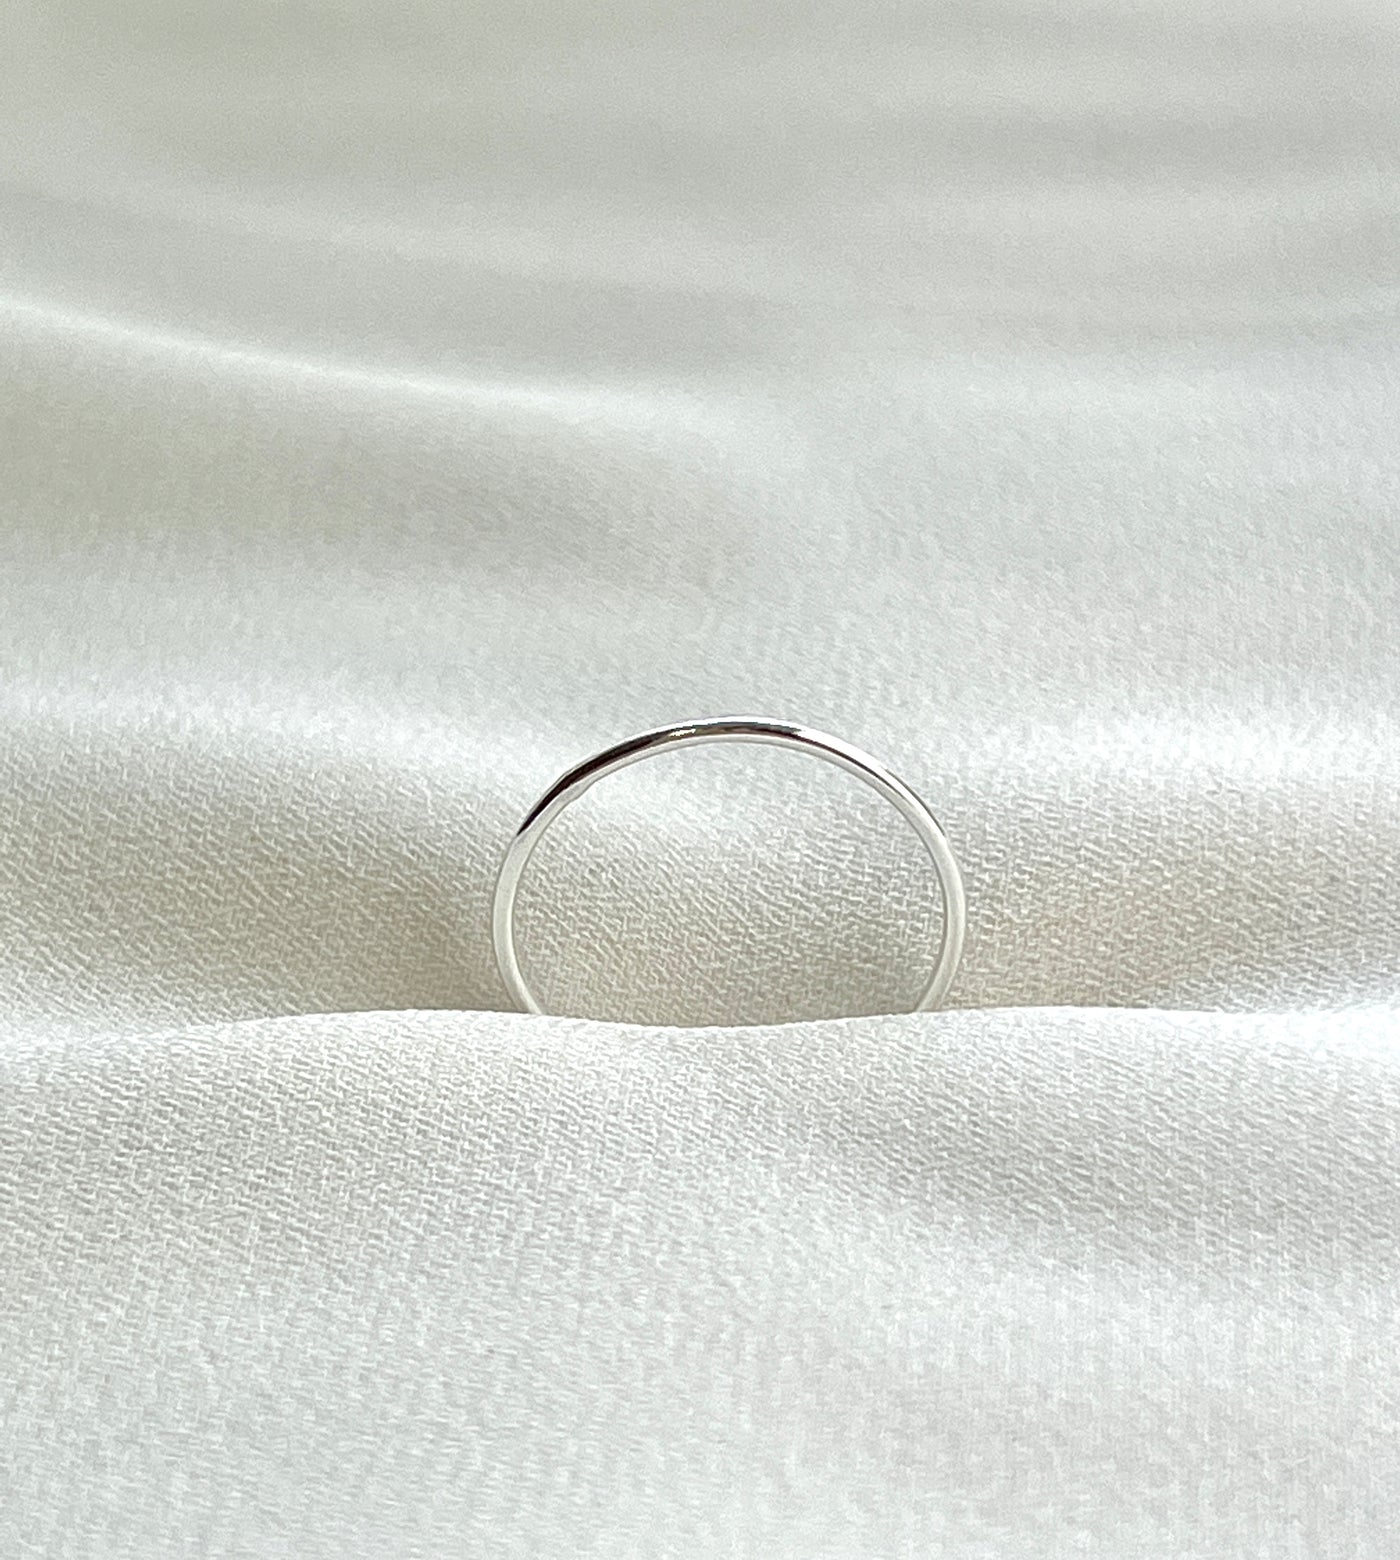 Simple Sterling Silver Stacking Ring